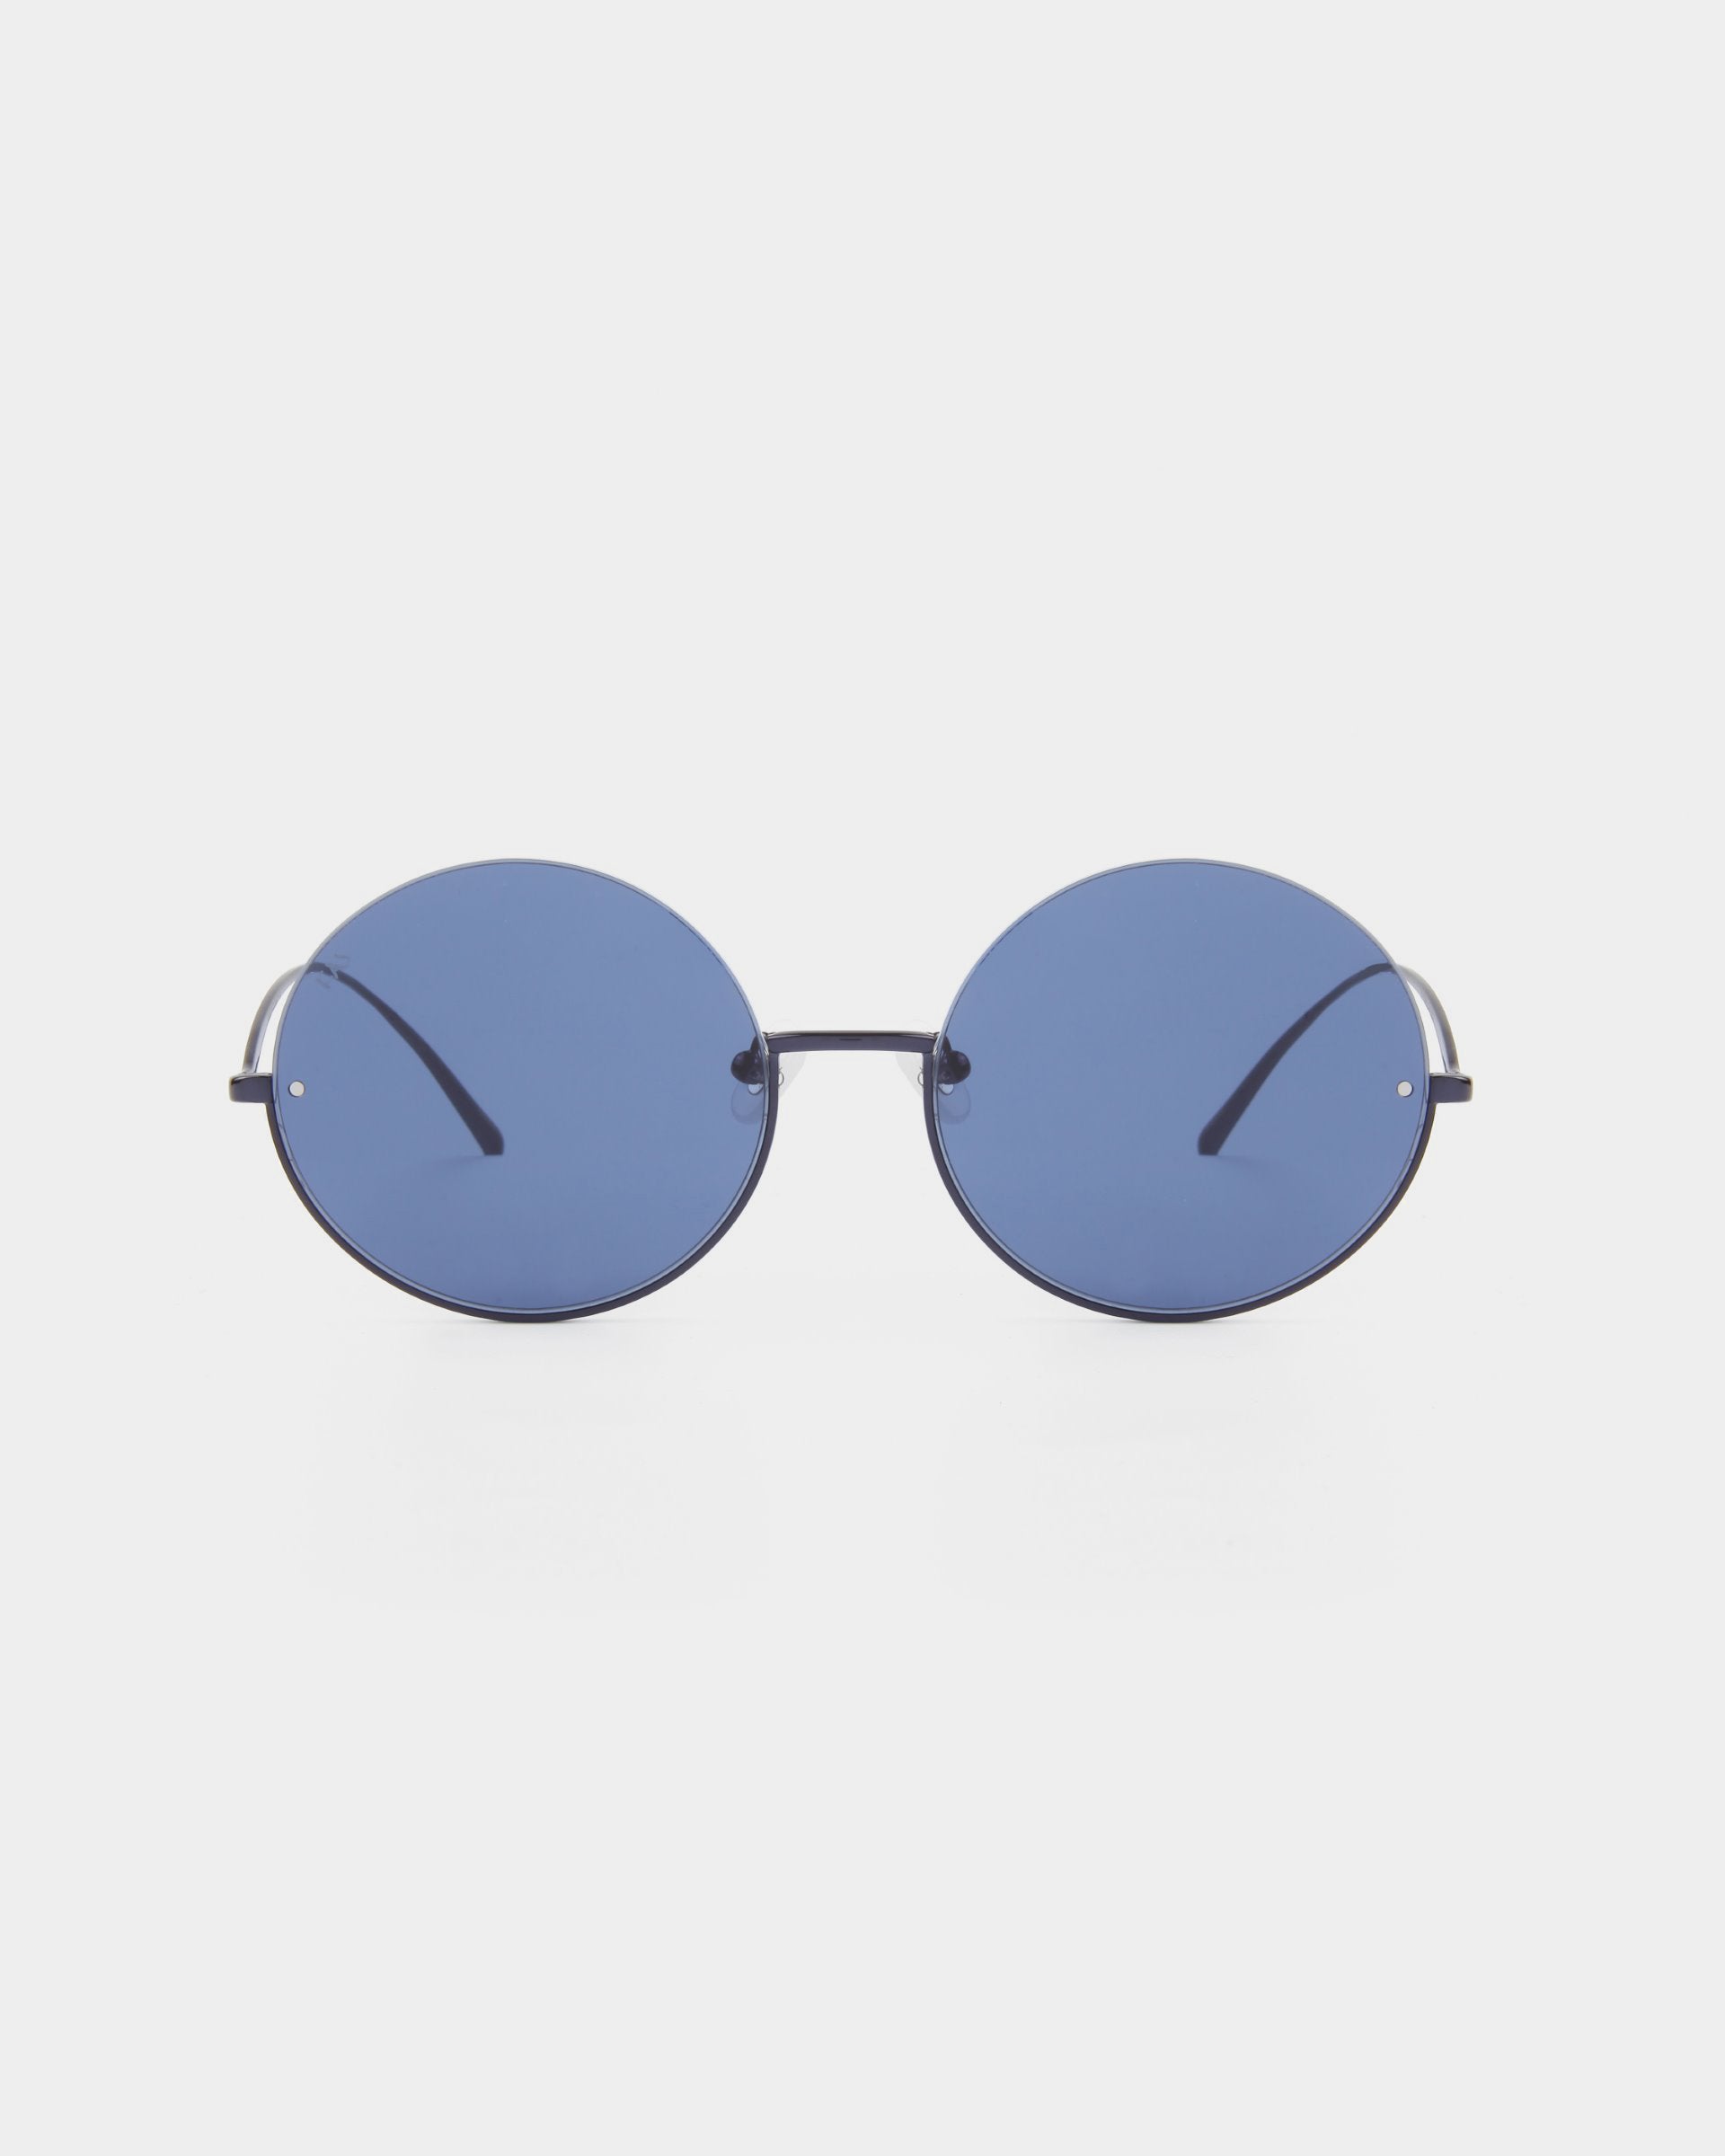 A pair of Oceana sunglasses from For Art&#39;s Sake® with dark blue-tinted nylon lenses that are 100% UVA &amp; UVB-protected and thin stainless steel frames. The arms are sleek and minimalist, blending seamlessly with the modern design of the eyewear. The background is plain white.